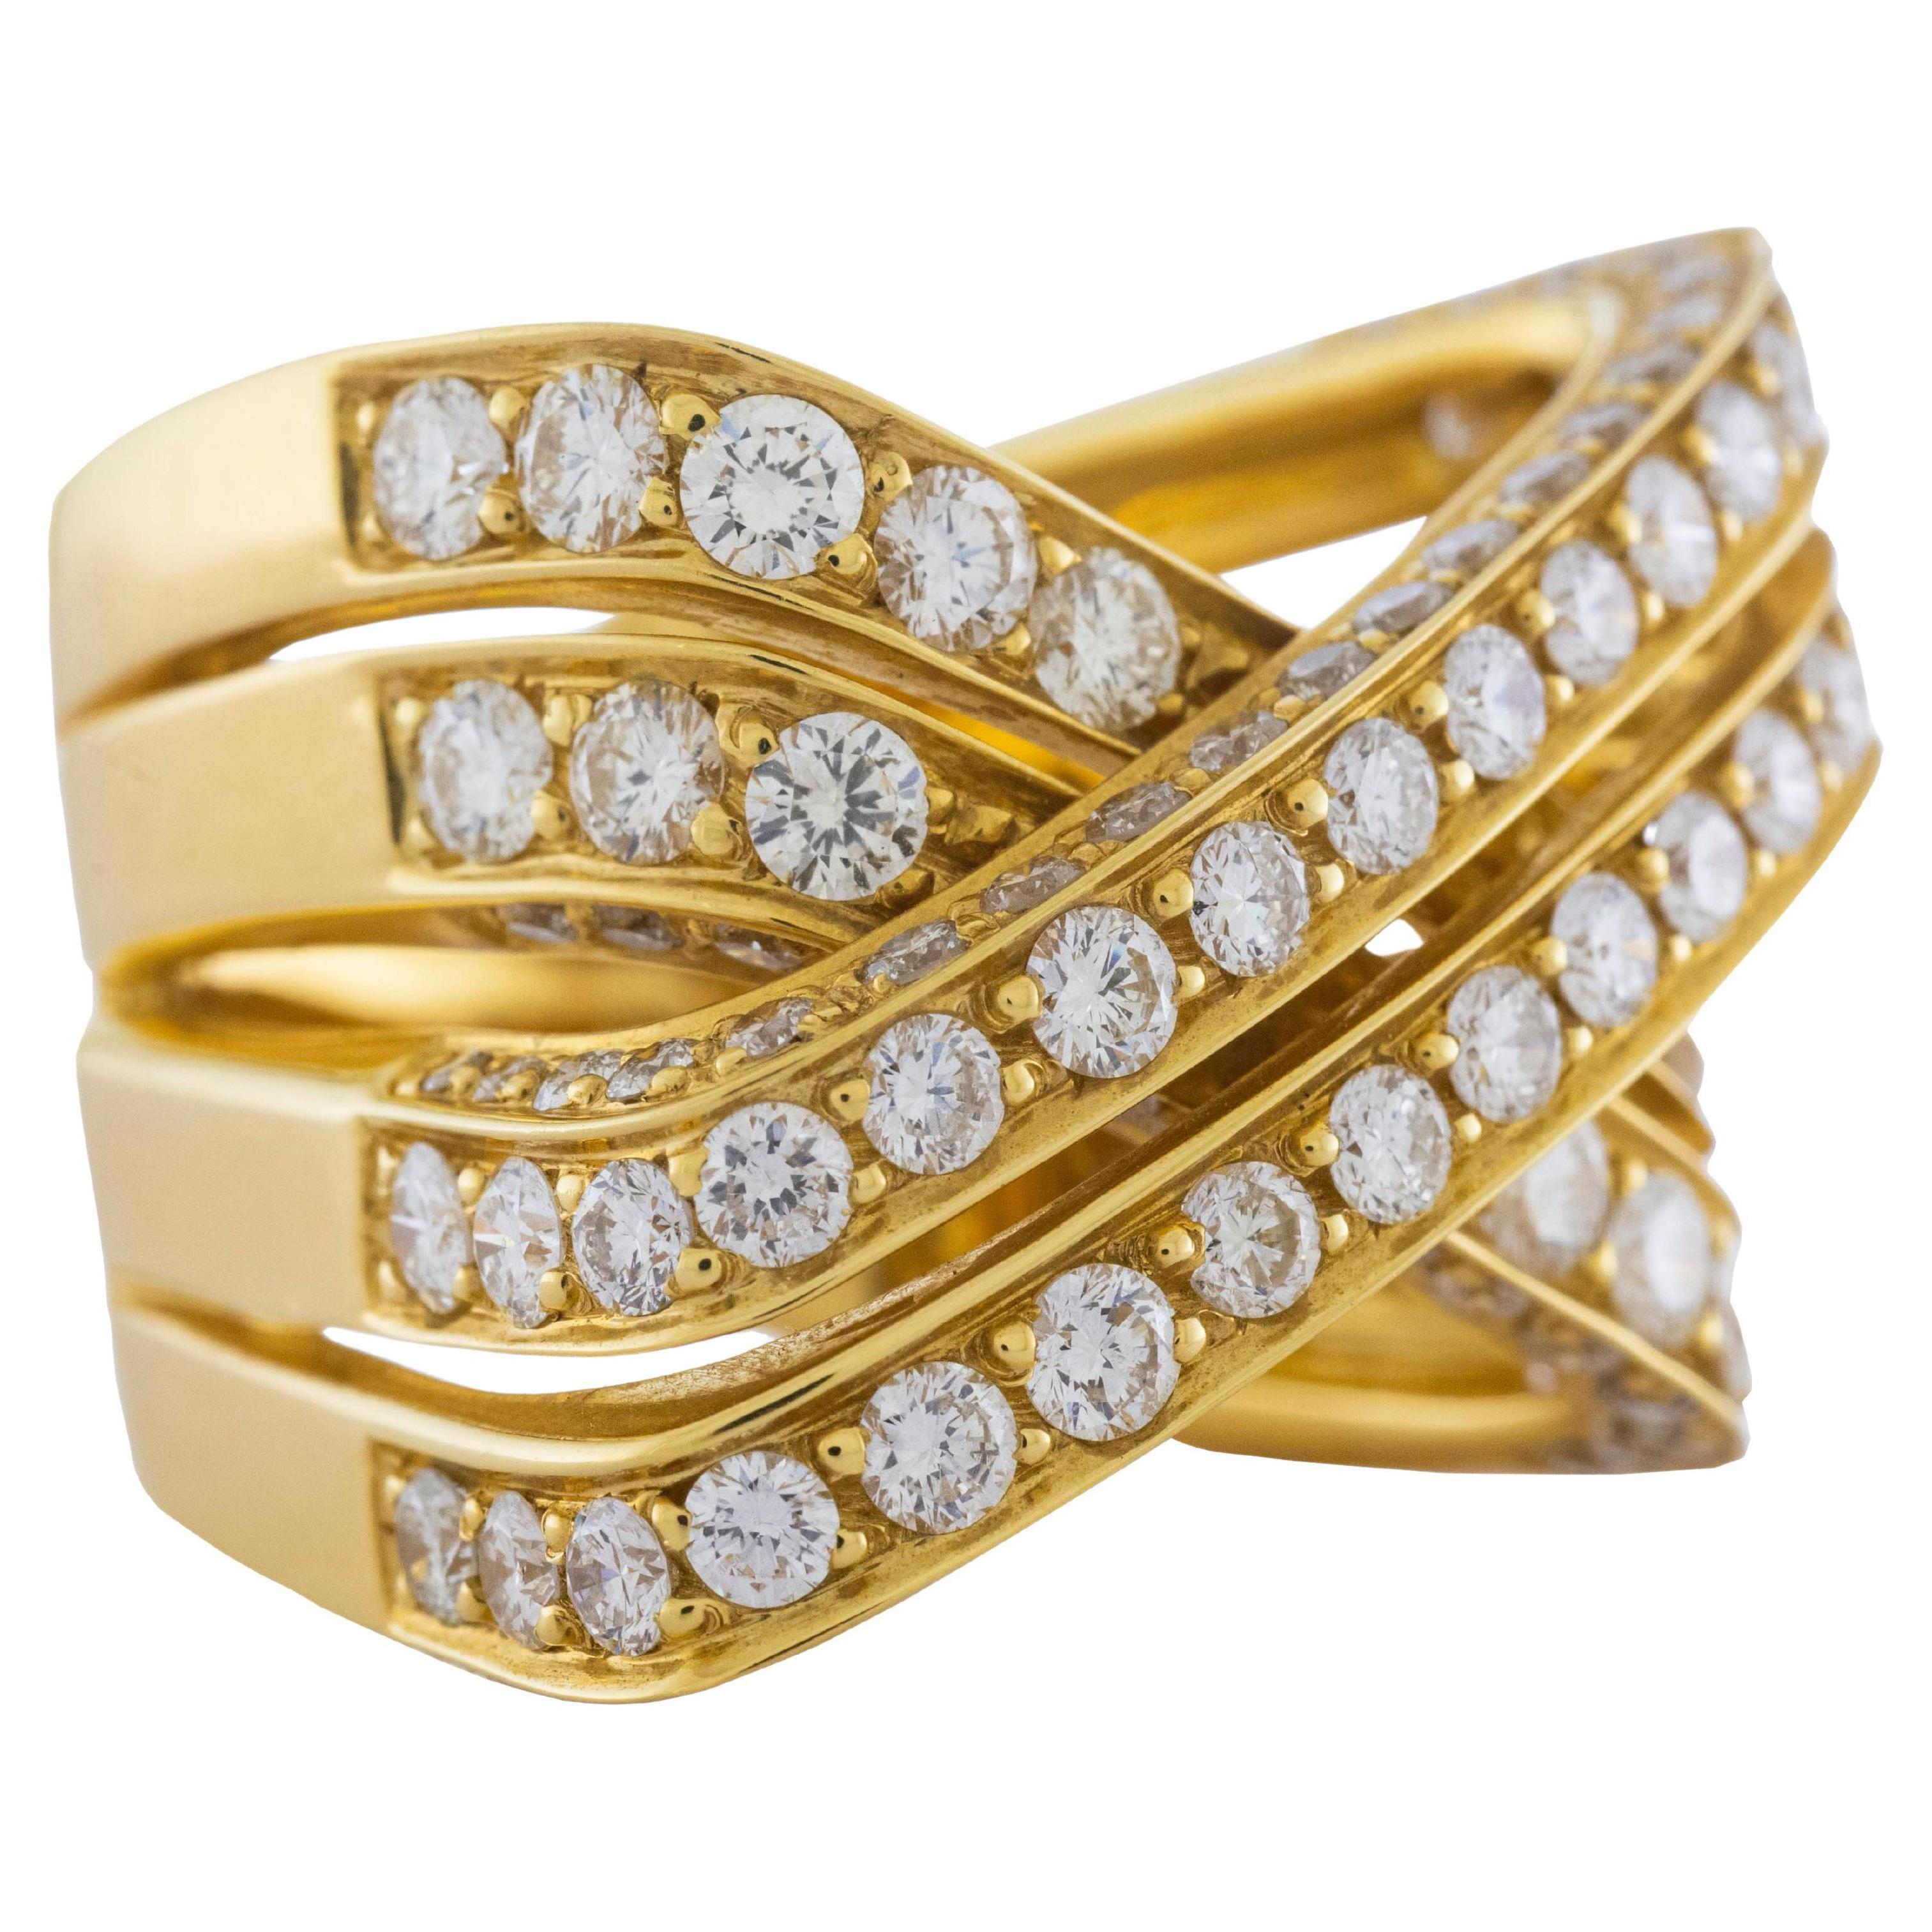 18 Karat Yellow Gold Diamonds Ct 3.89 Knot Ring Cluster Band Cocktail For Sale